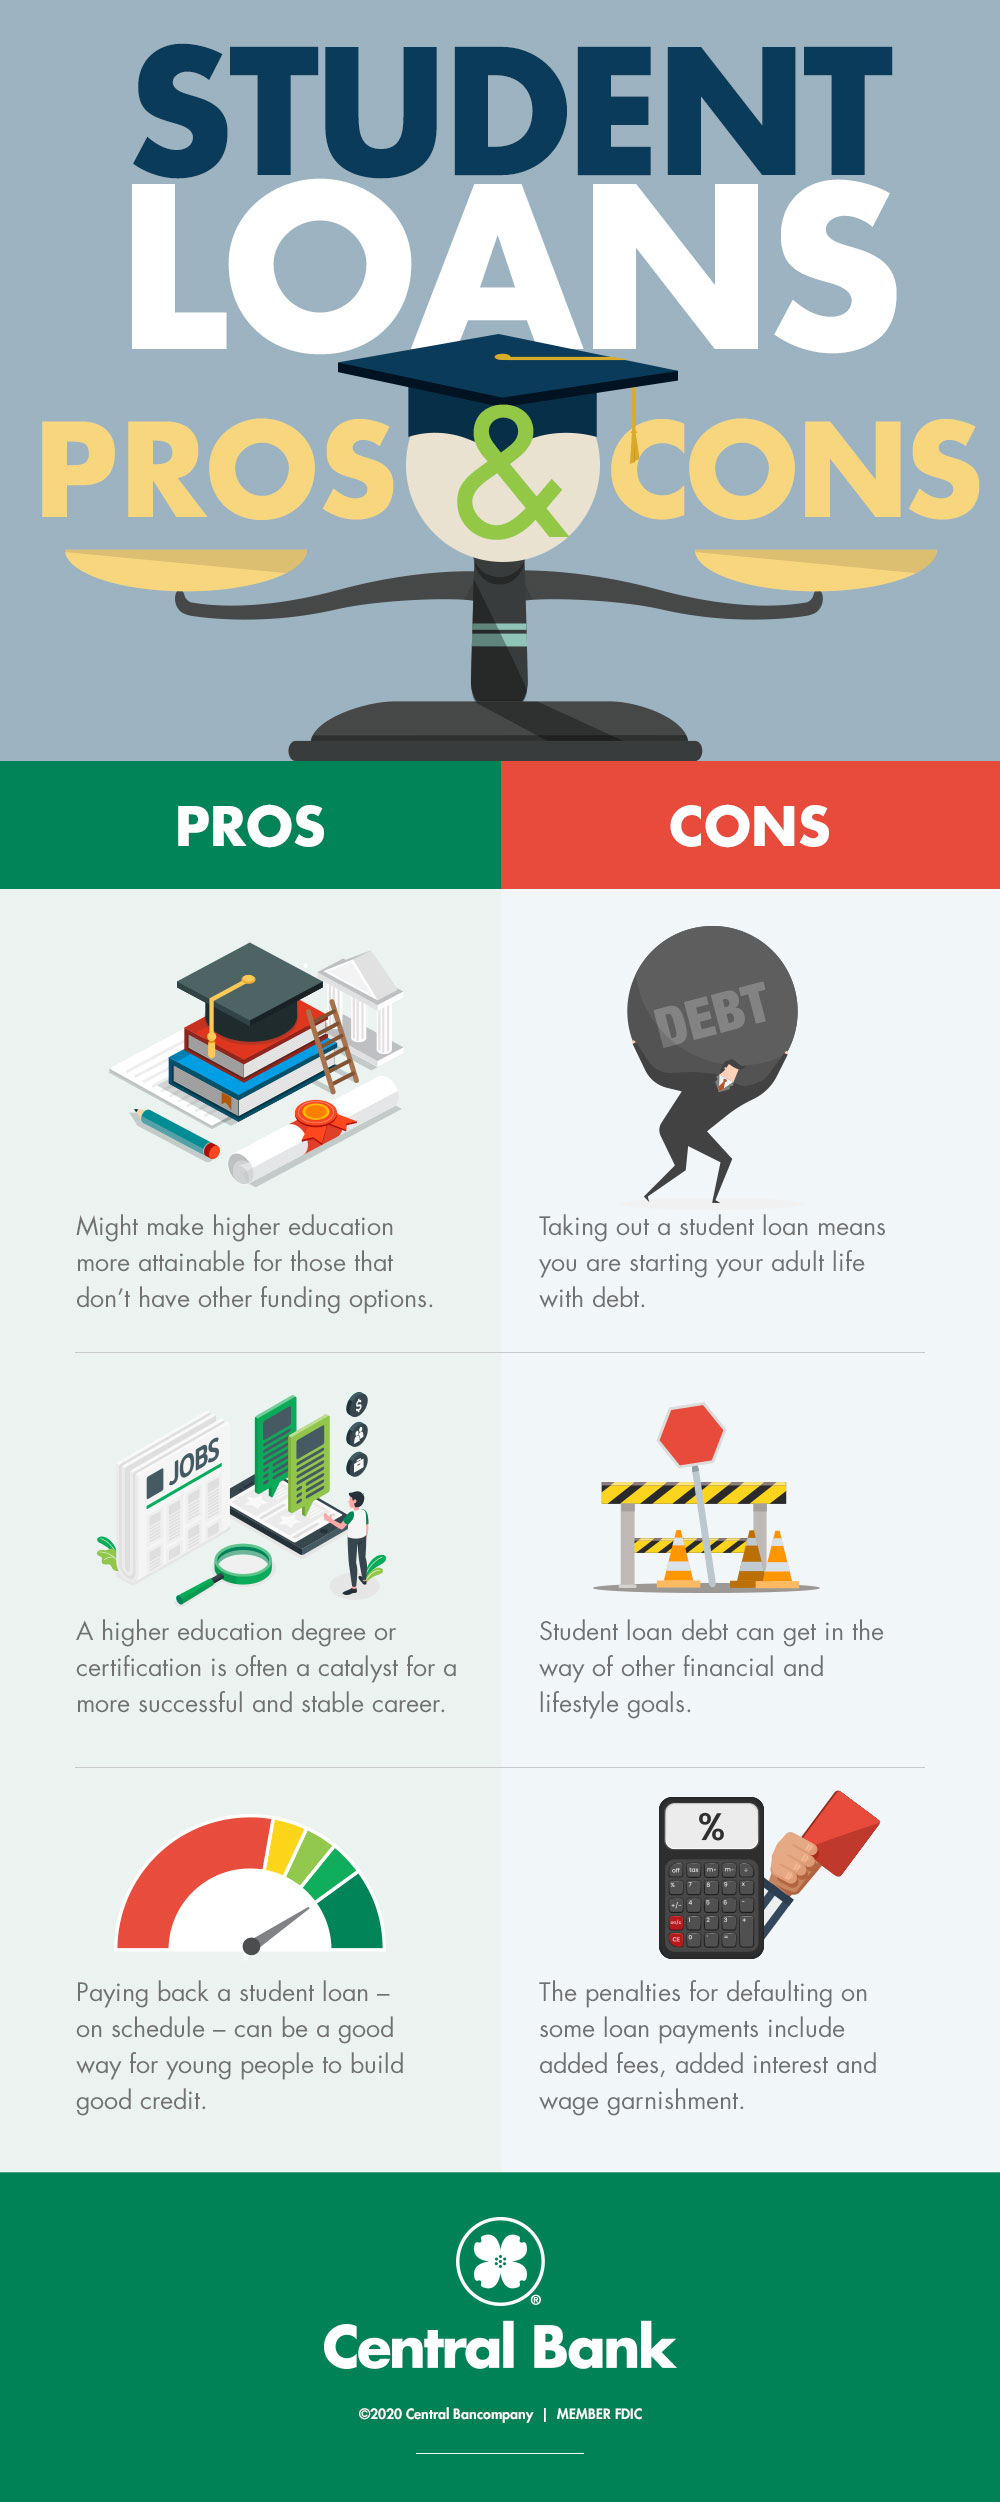 An infographic about the pros and cons of student loans